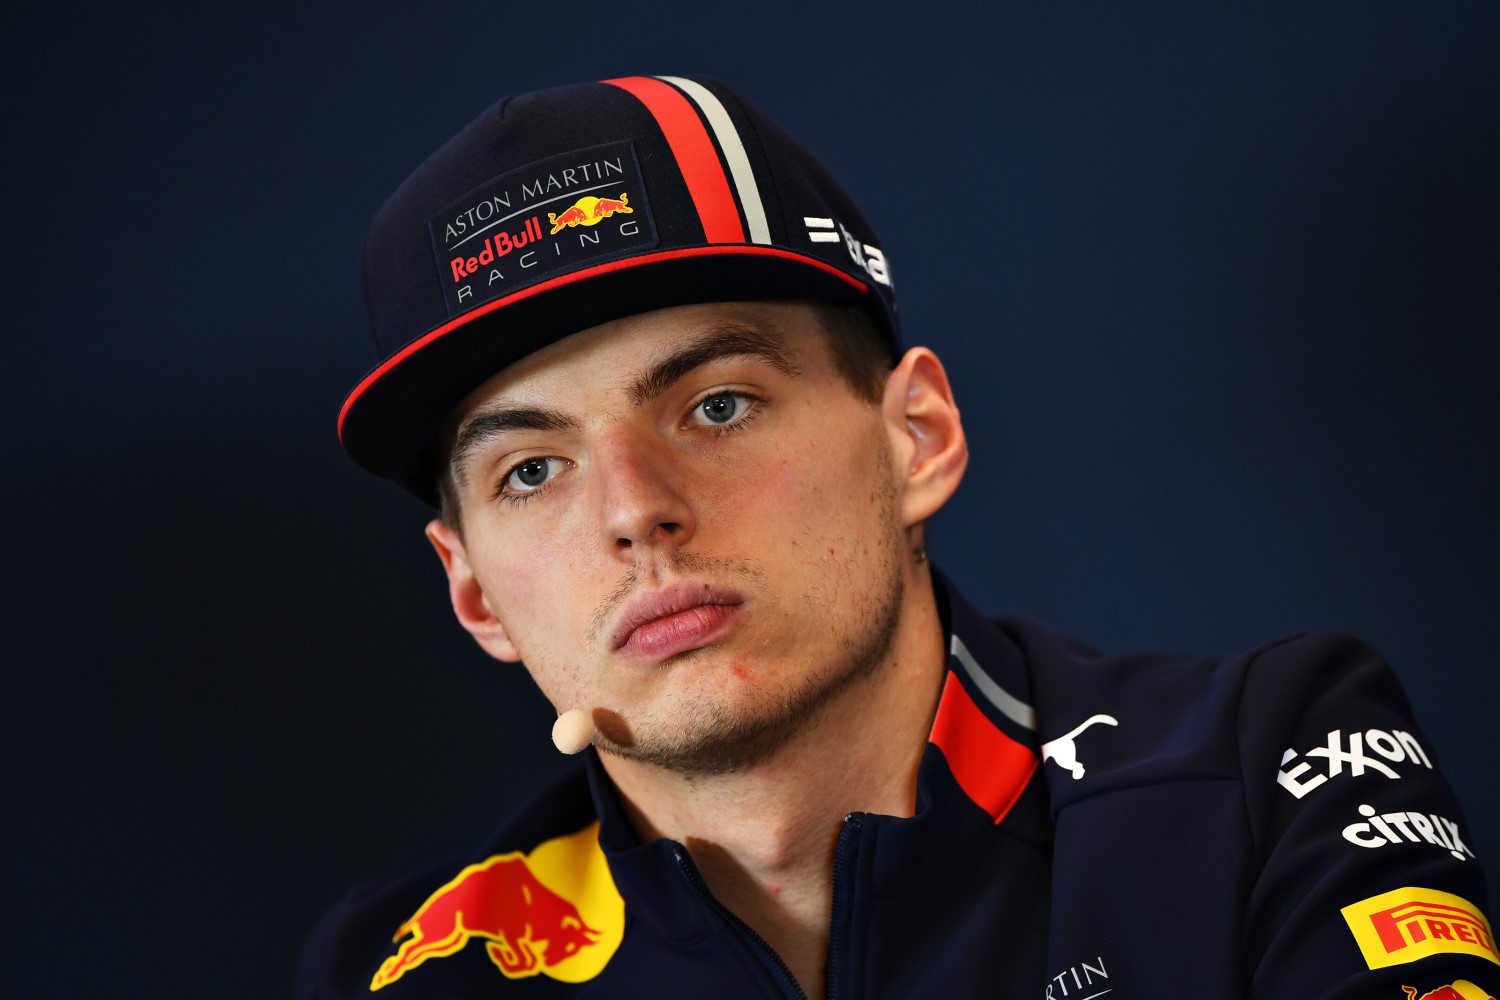 Verstappen did not take kindly to Hamilton's remarks, even though they are true